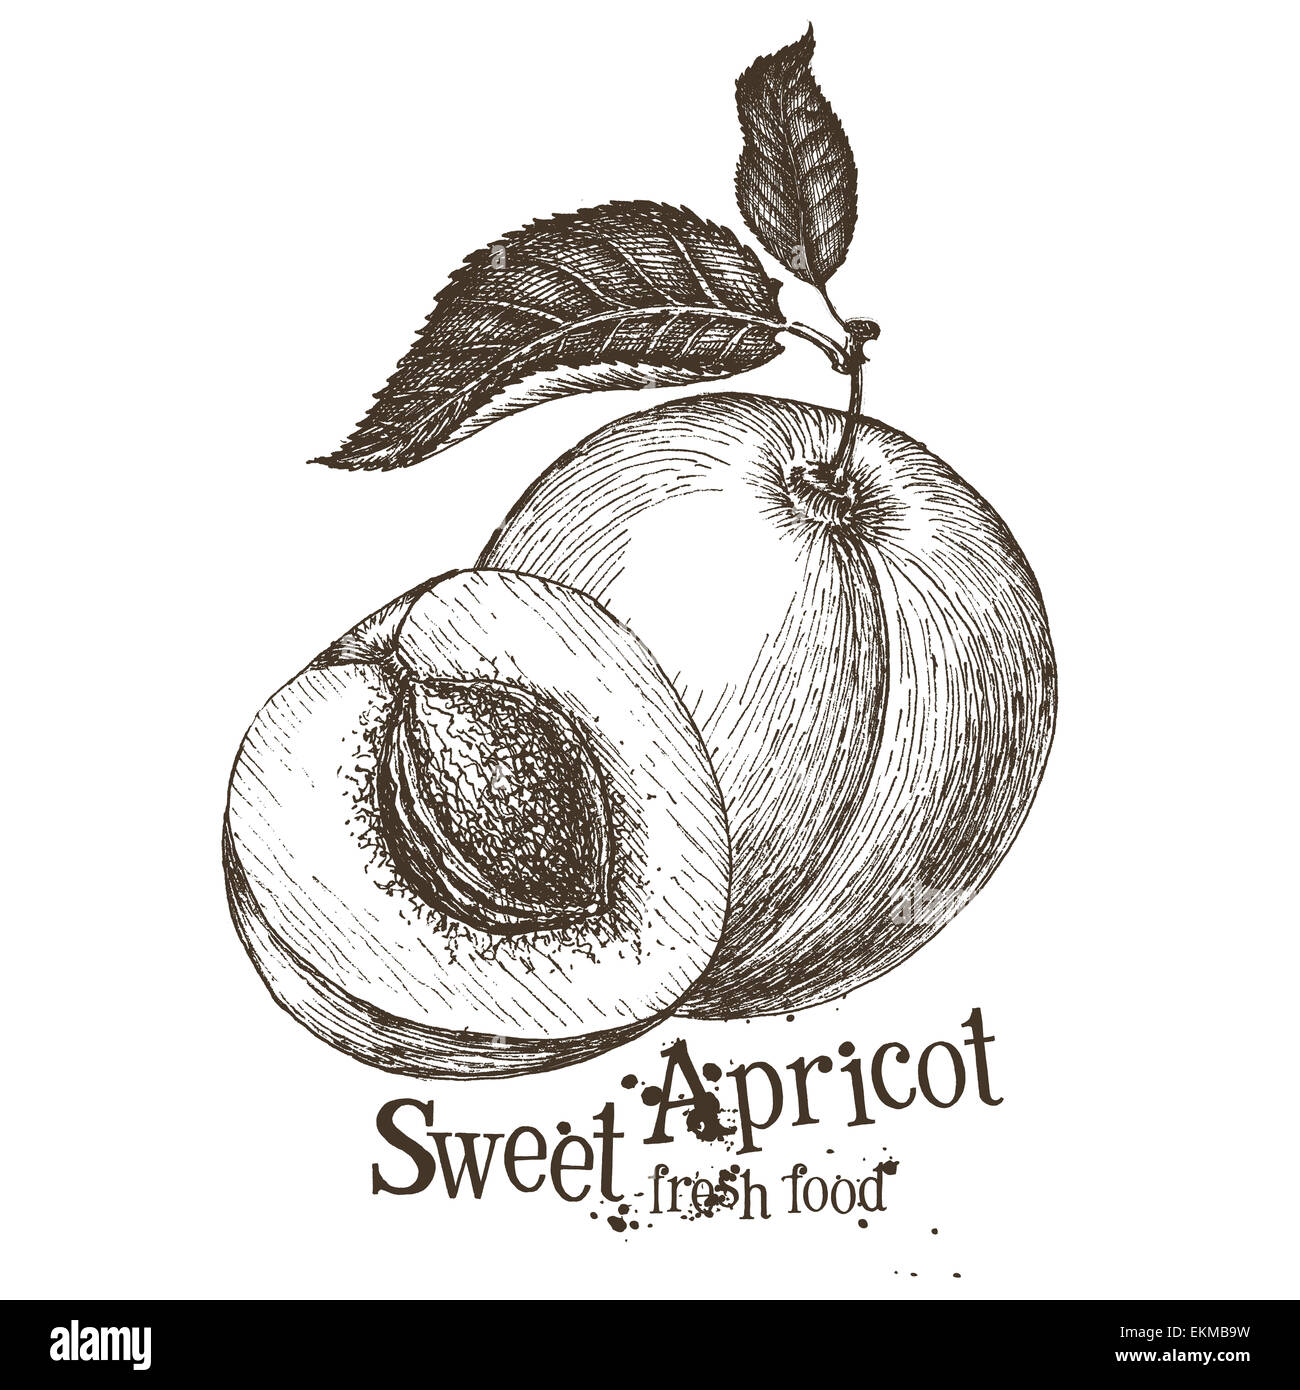 apricot vector logo design template. fruit or food icon. Stock Photo